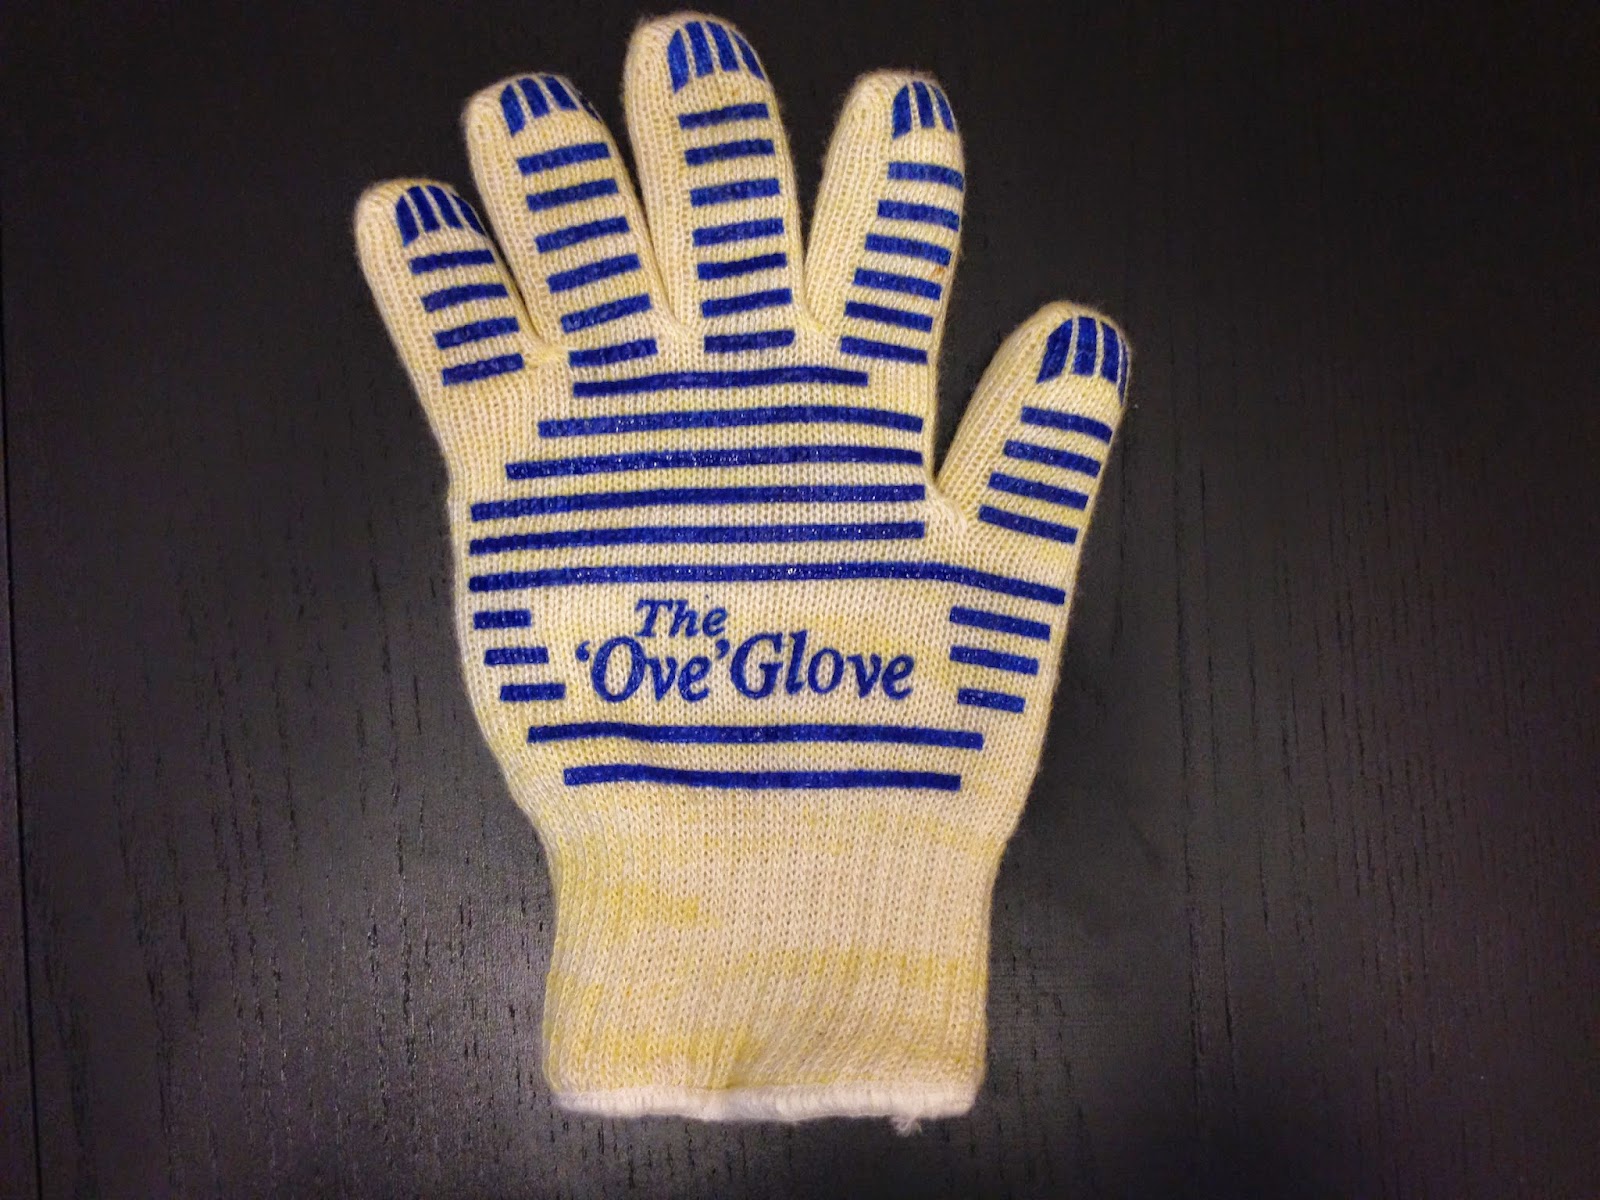 The Best Oven Mitts Are The Ove Glove